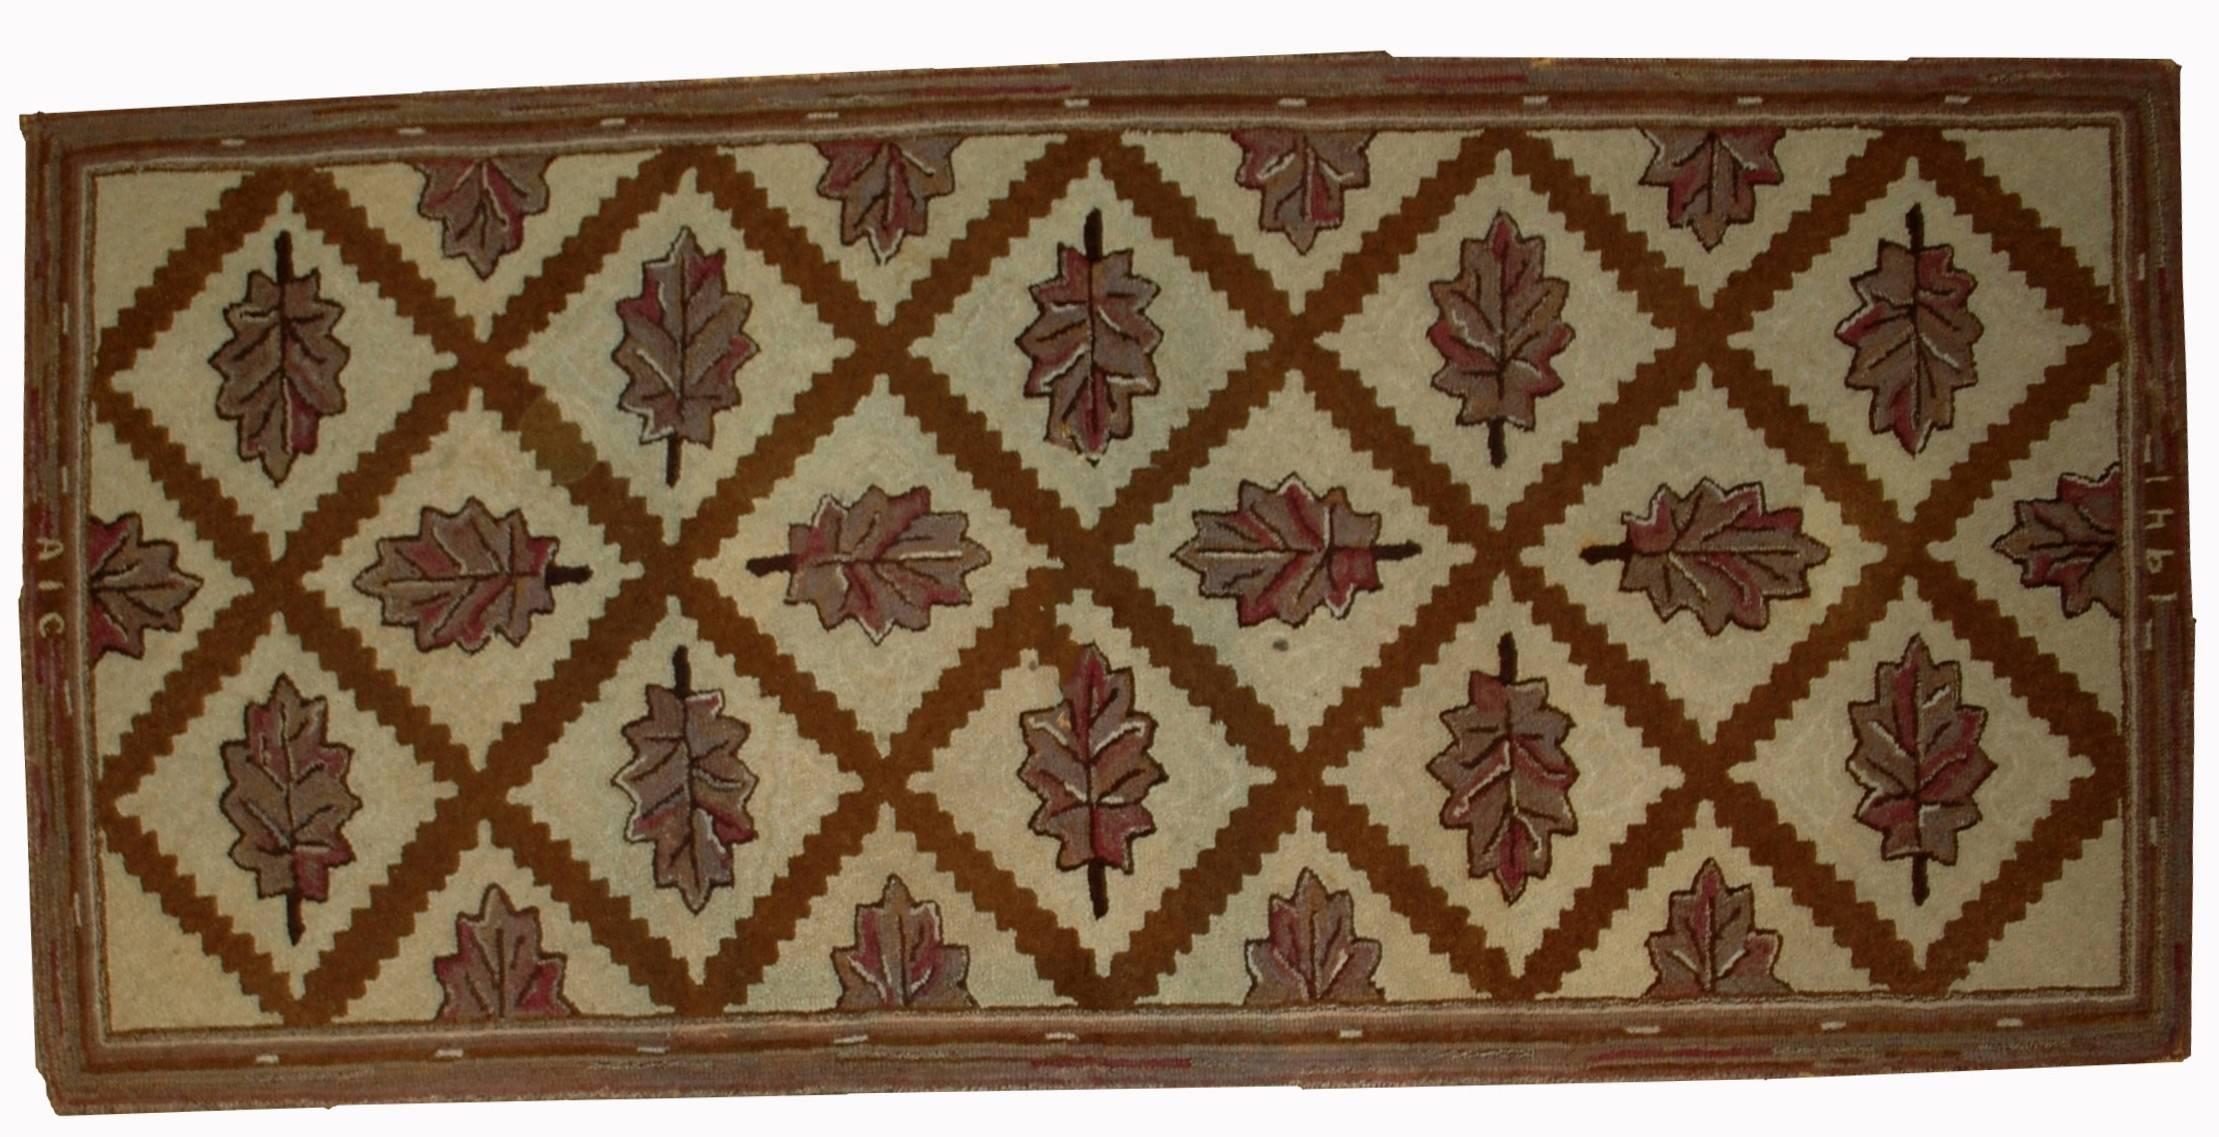 Handmade antique American hooked rug in good condition. The rug has been made in geometric design with diamond shaped figures and leaves inside them. Main colours are beige and brown. The rug has been restored and in good condition now.
     